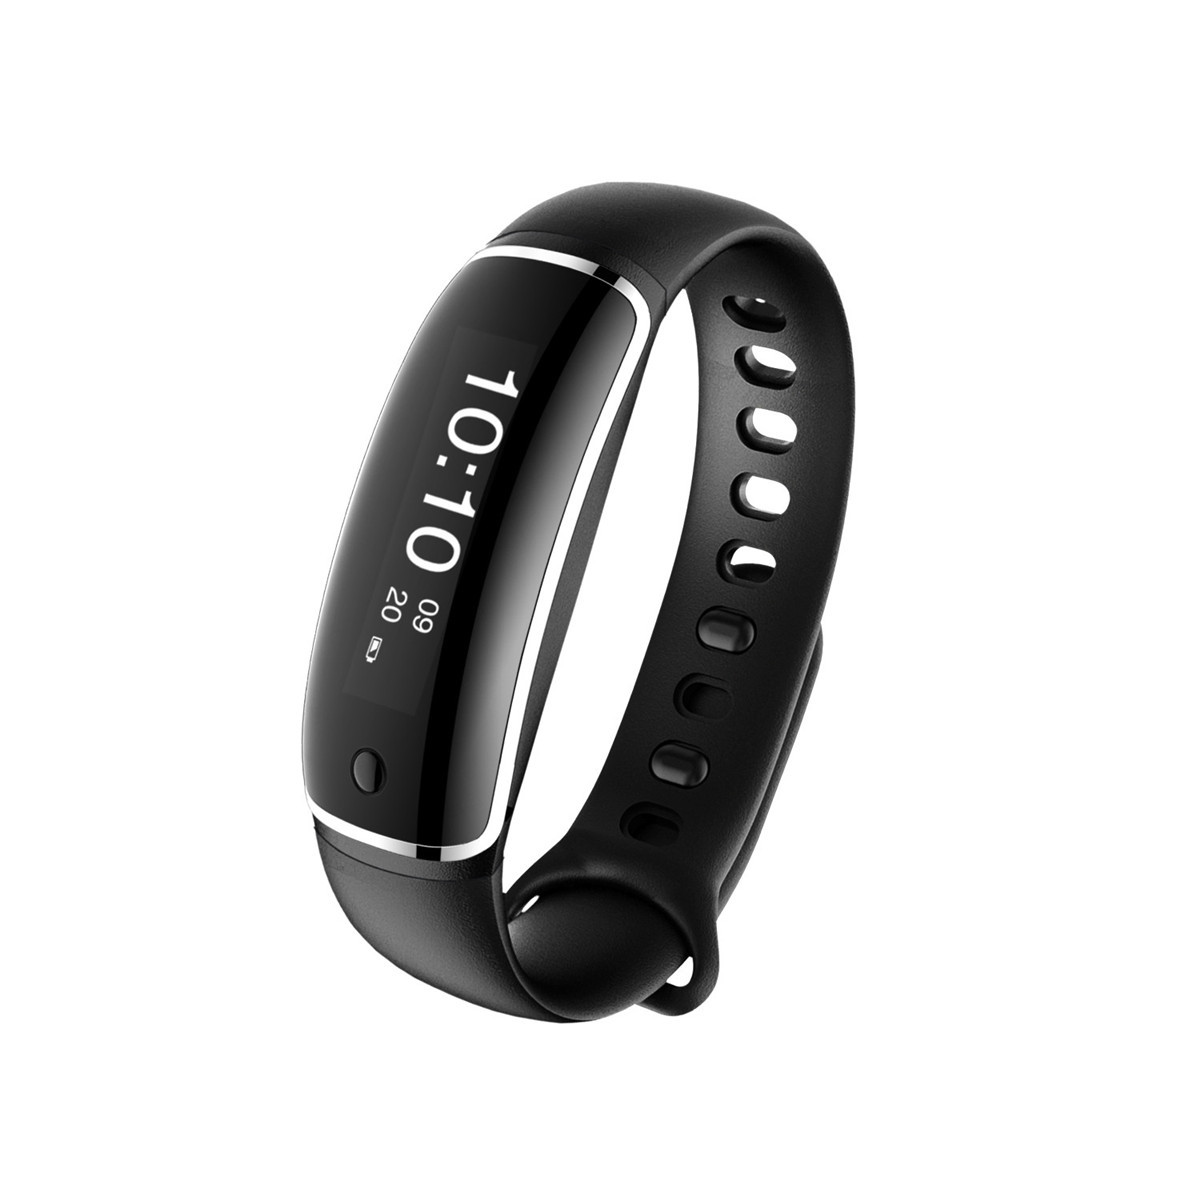 Bakeey M4 Smart Wristband Bracelet Heart Rate Monitor bluetooth 4.0 For Android/ iOS 1